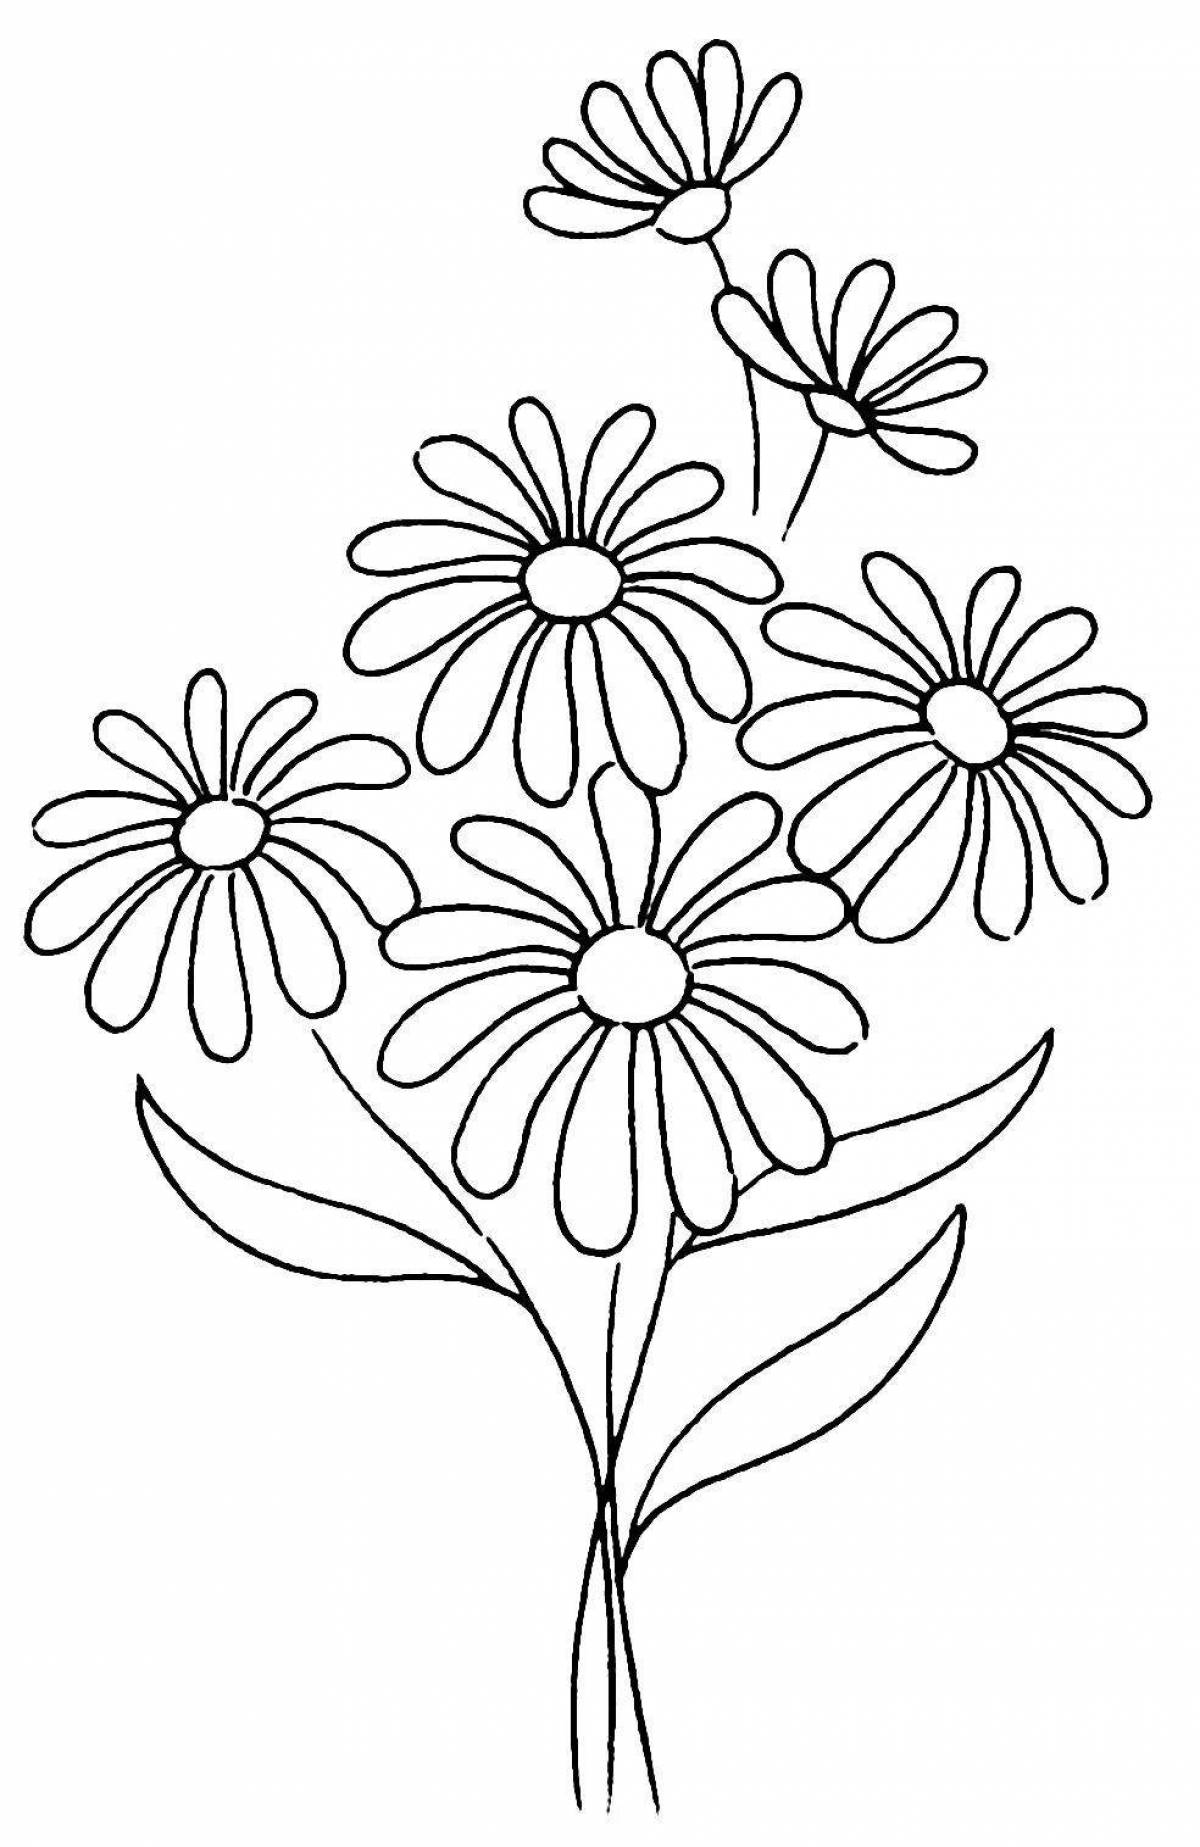 Colouring amazing bouquet of daisies